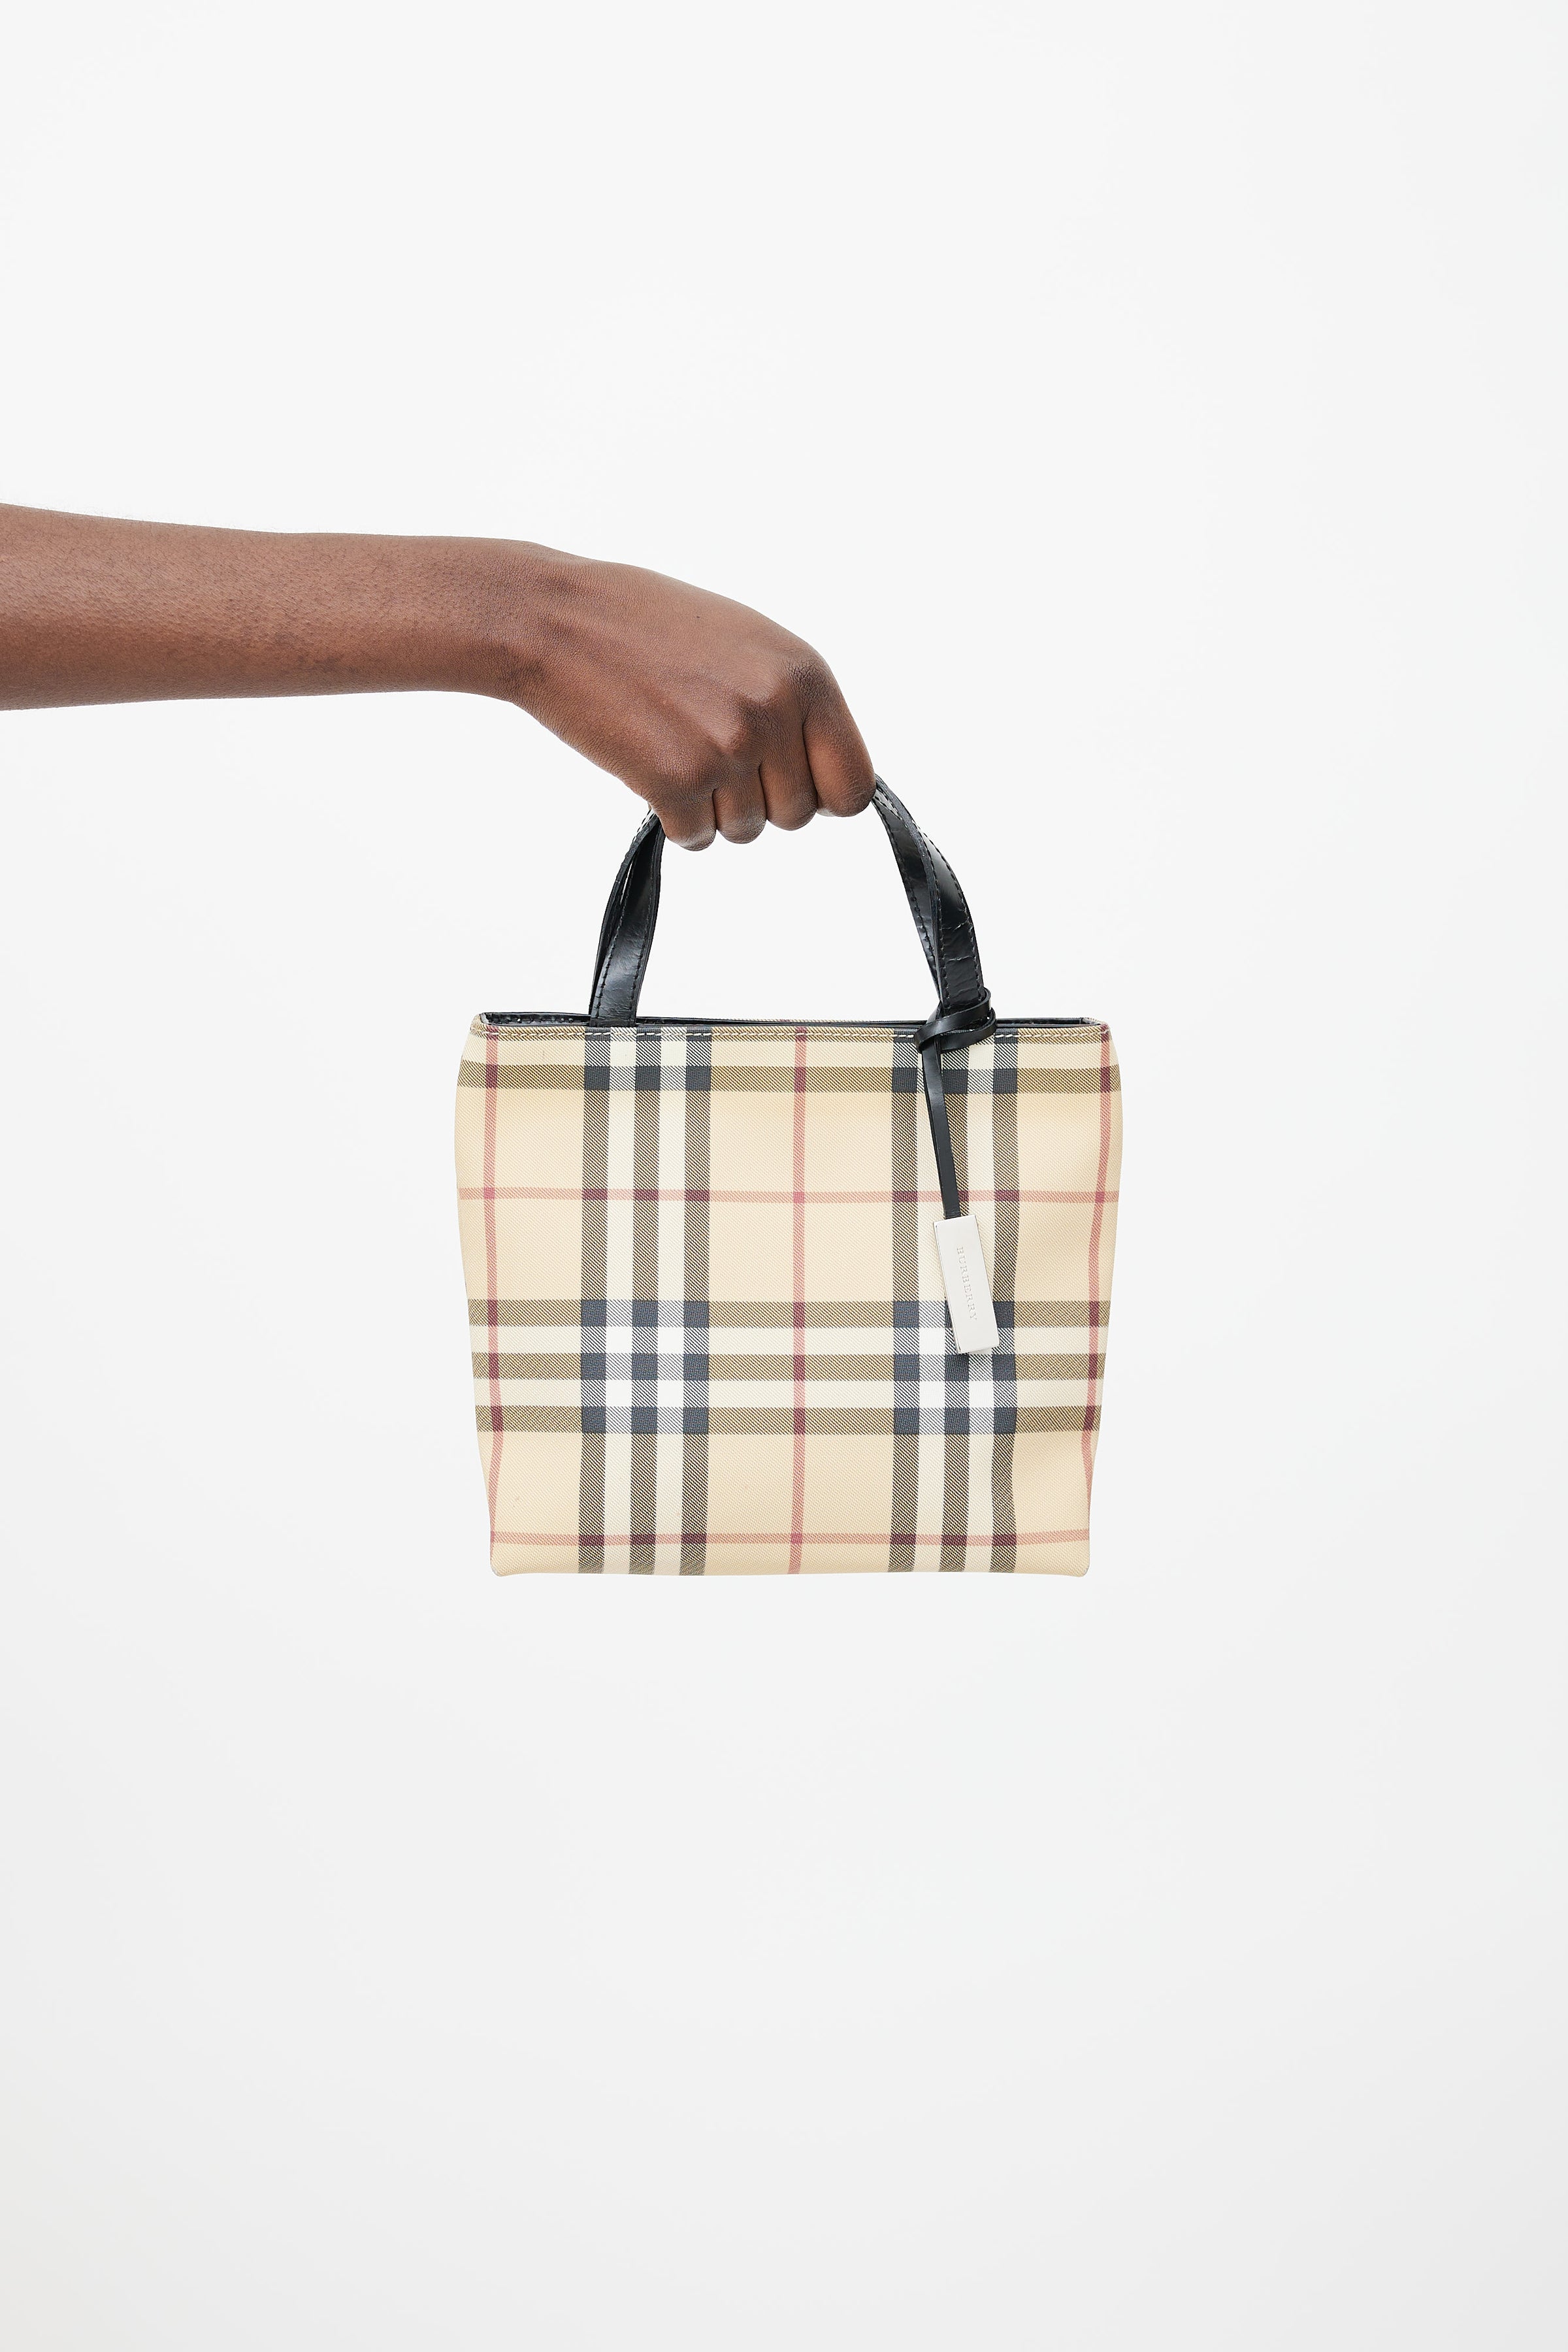 Best Like New Authentic Burberry Tote for sale in Calgary, Alberta for 2023